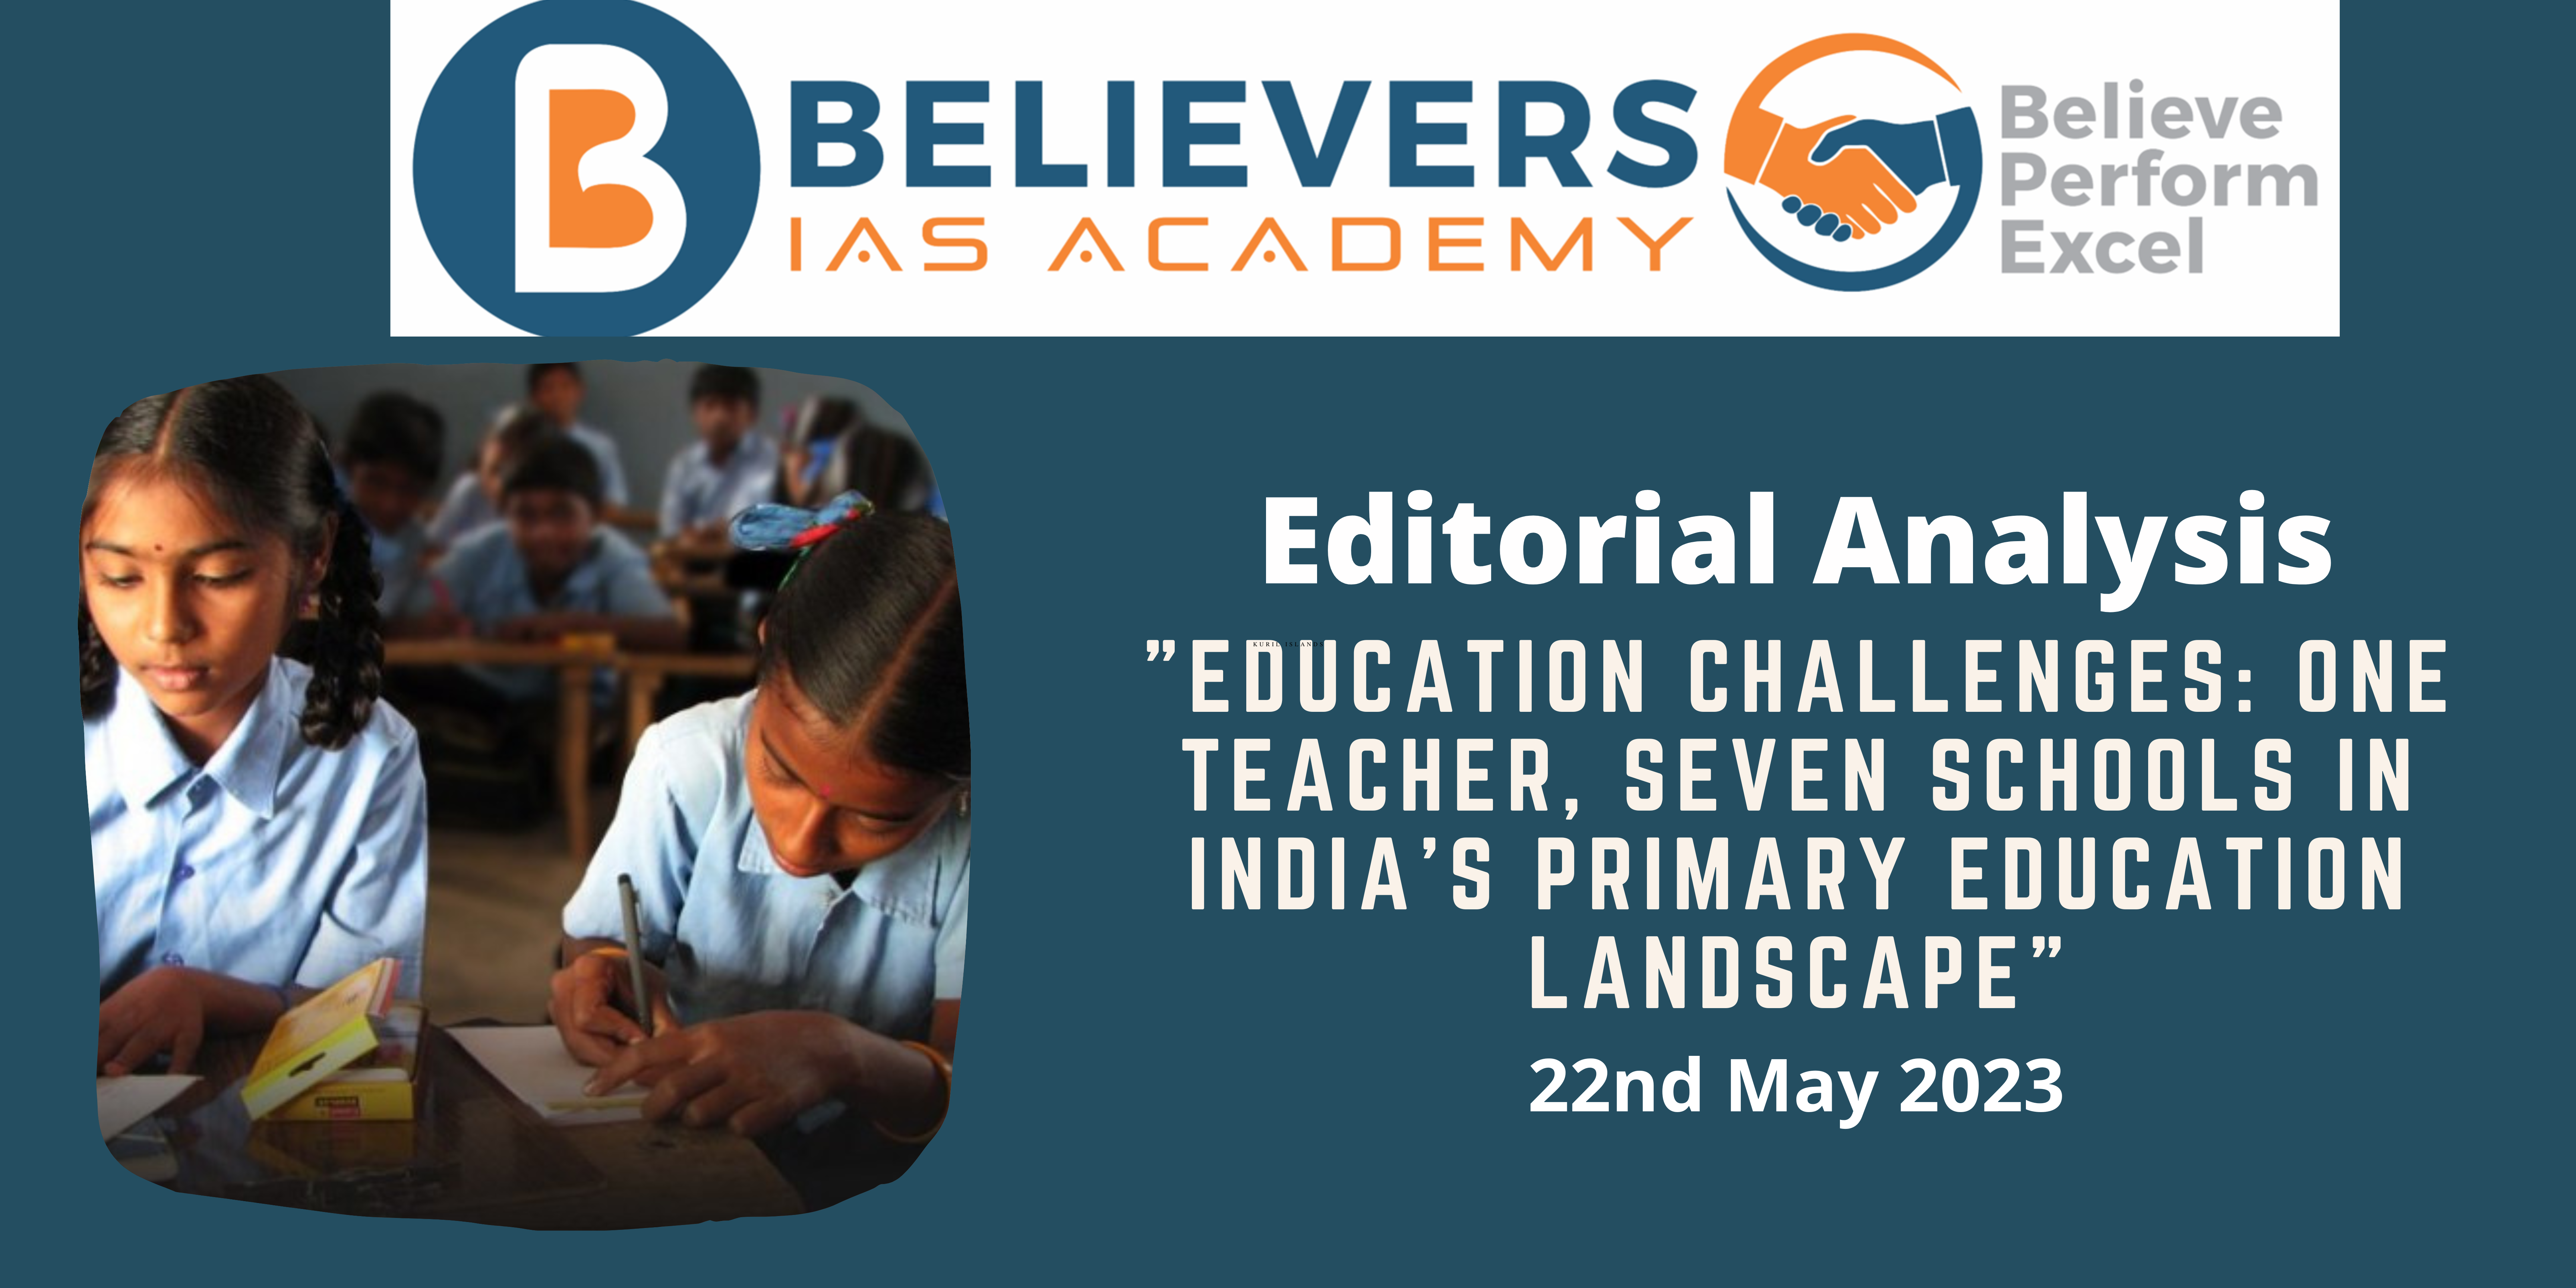 "Education Challenges: One Teacher, Seven Schools in India's Primary Education Landscape"